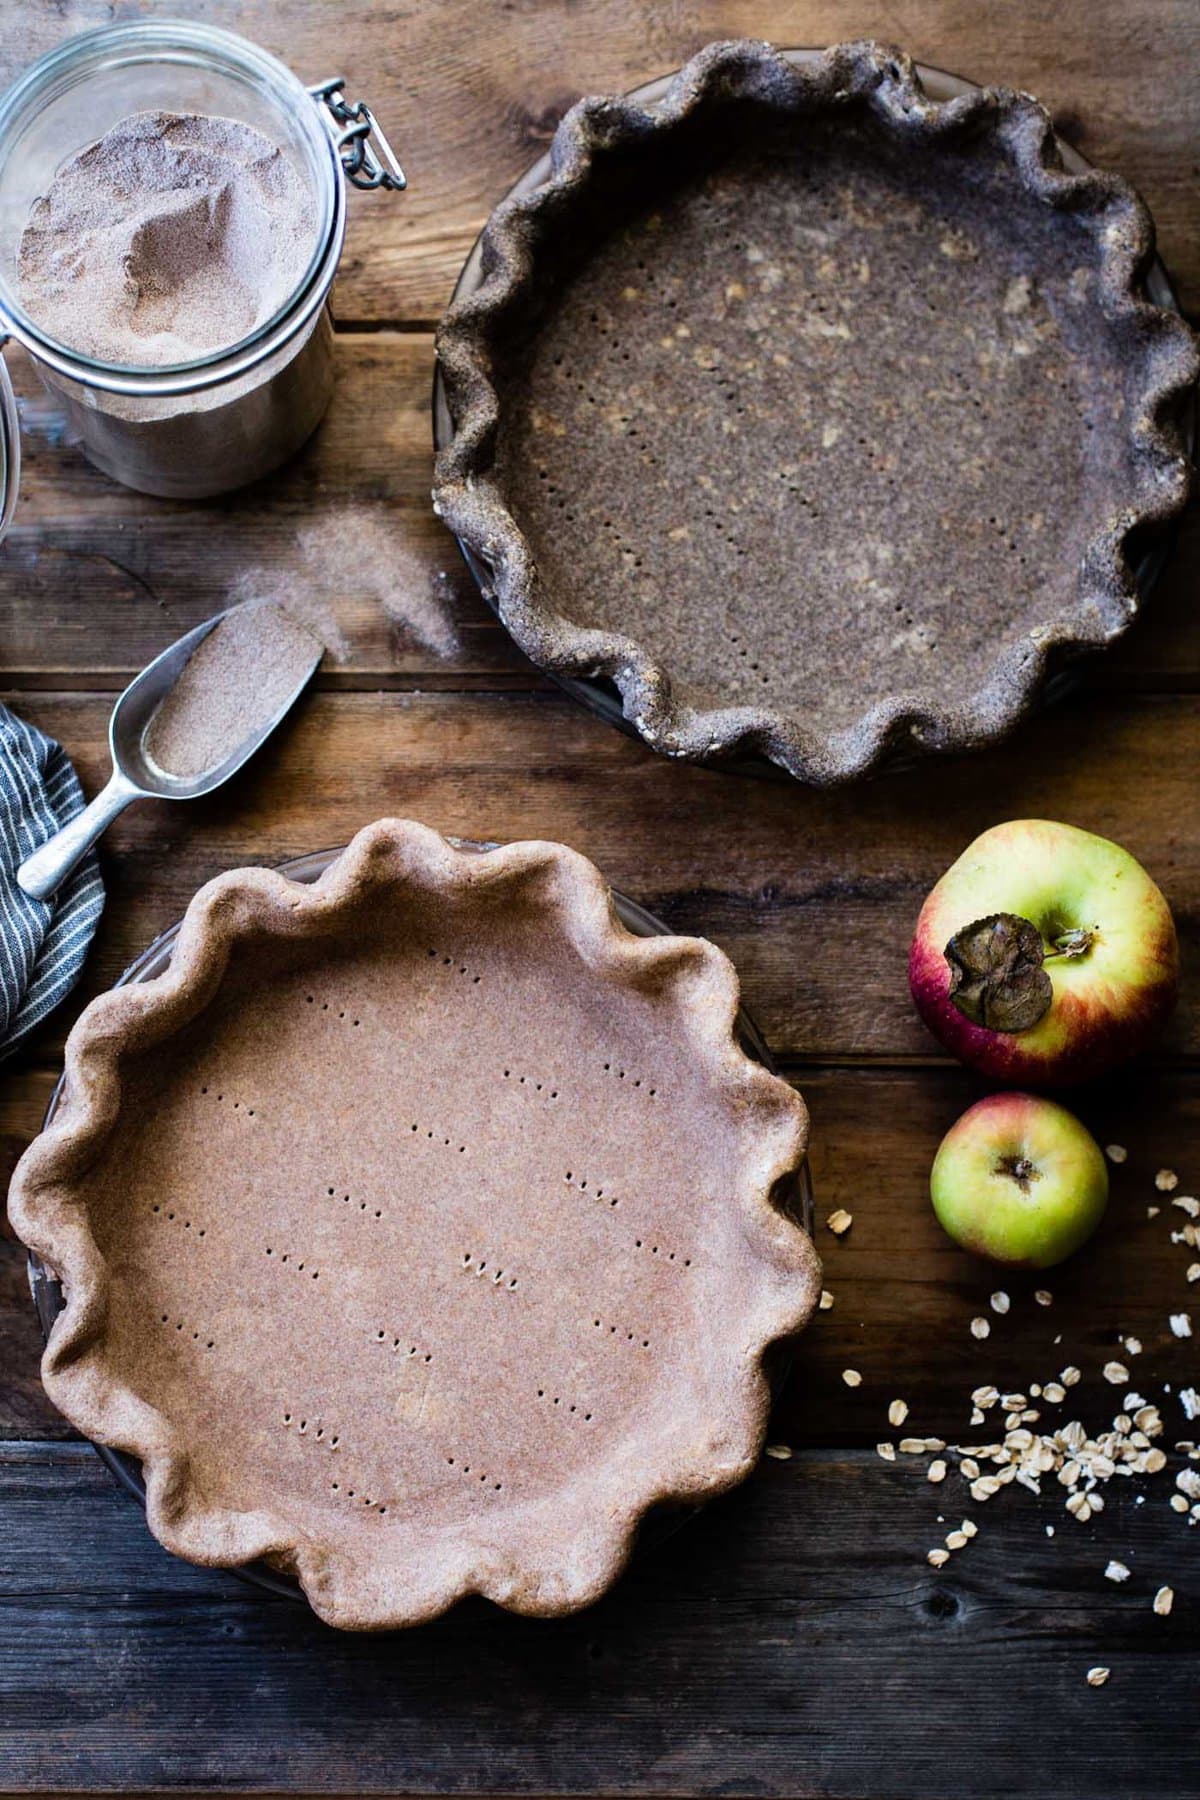 Two unbaked pie crusts sit on a wood surface, one tan colored from teff flour, the other deep gray-brown from buckwheat flour